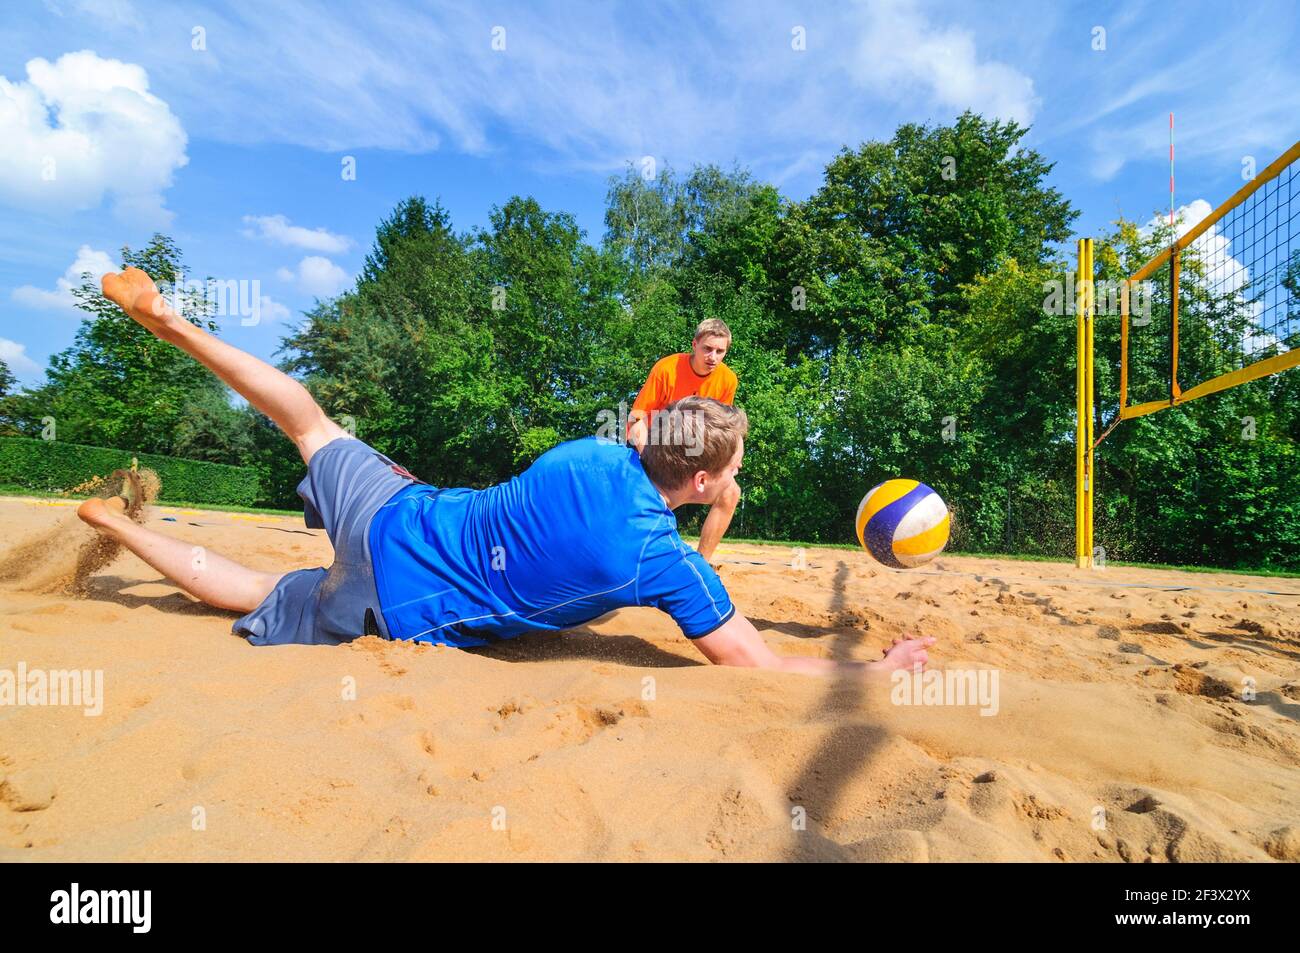 Intensive game on beachvolleyball court, fighting spirit to save the ball Stock Photo